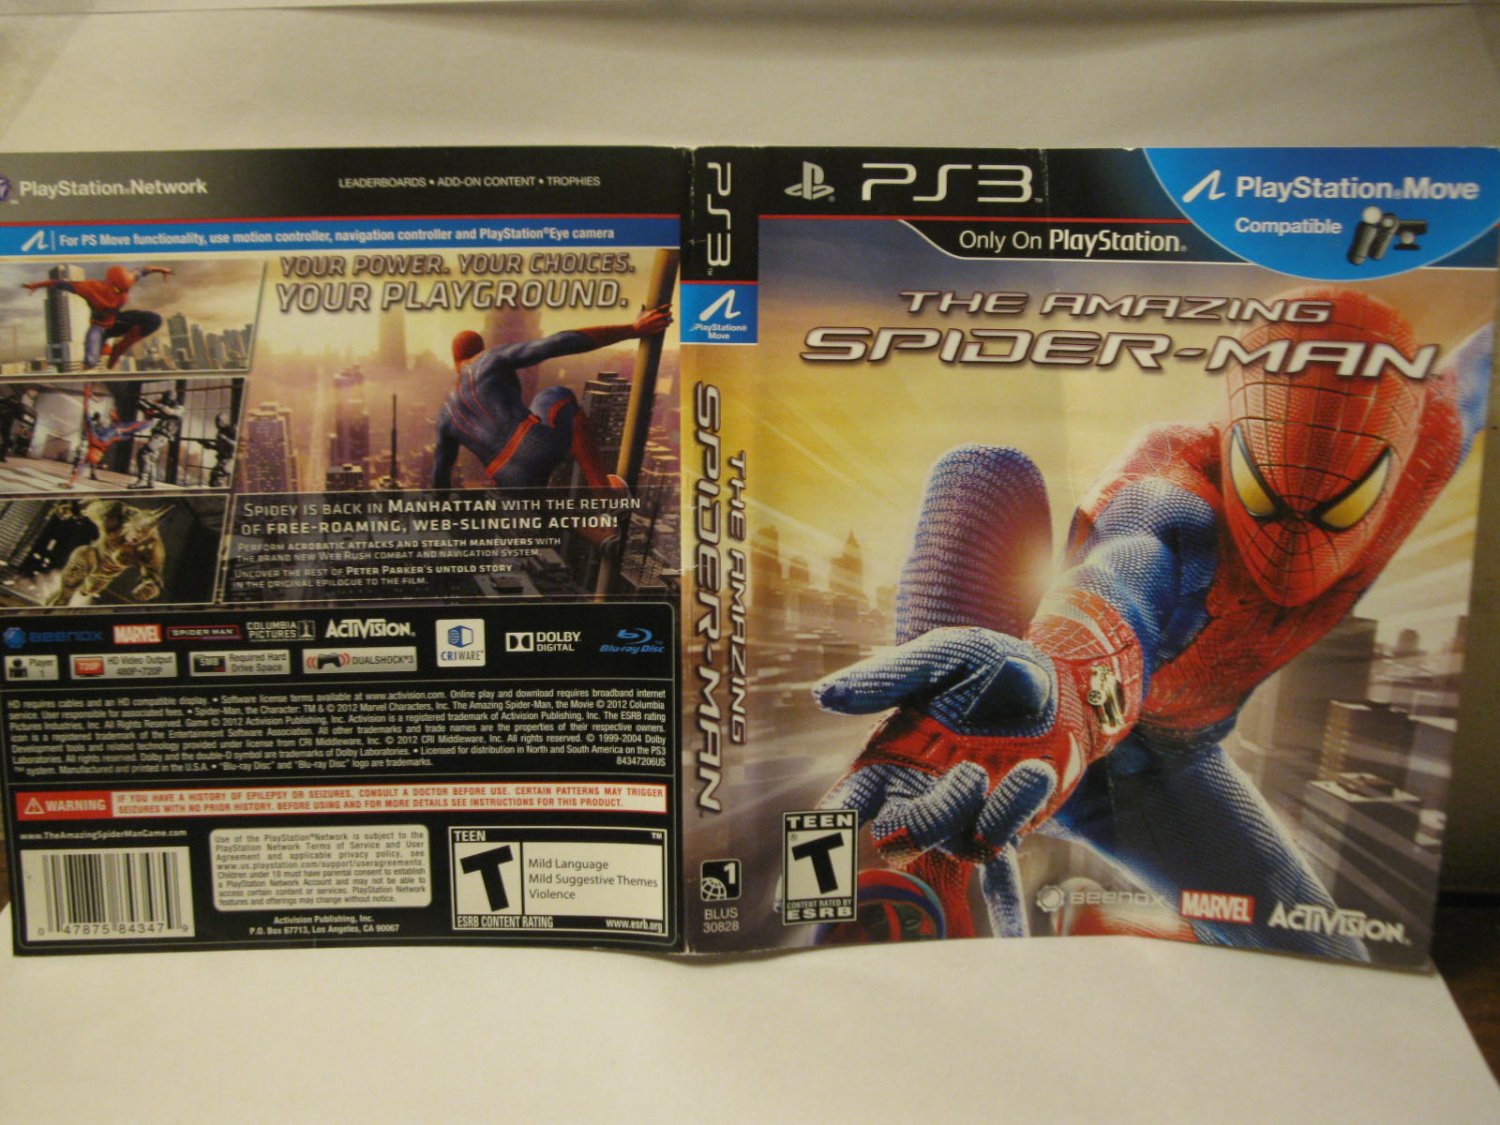 The Amazing Spider-Man - PlayStation 3, PlayStation 3